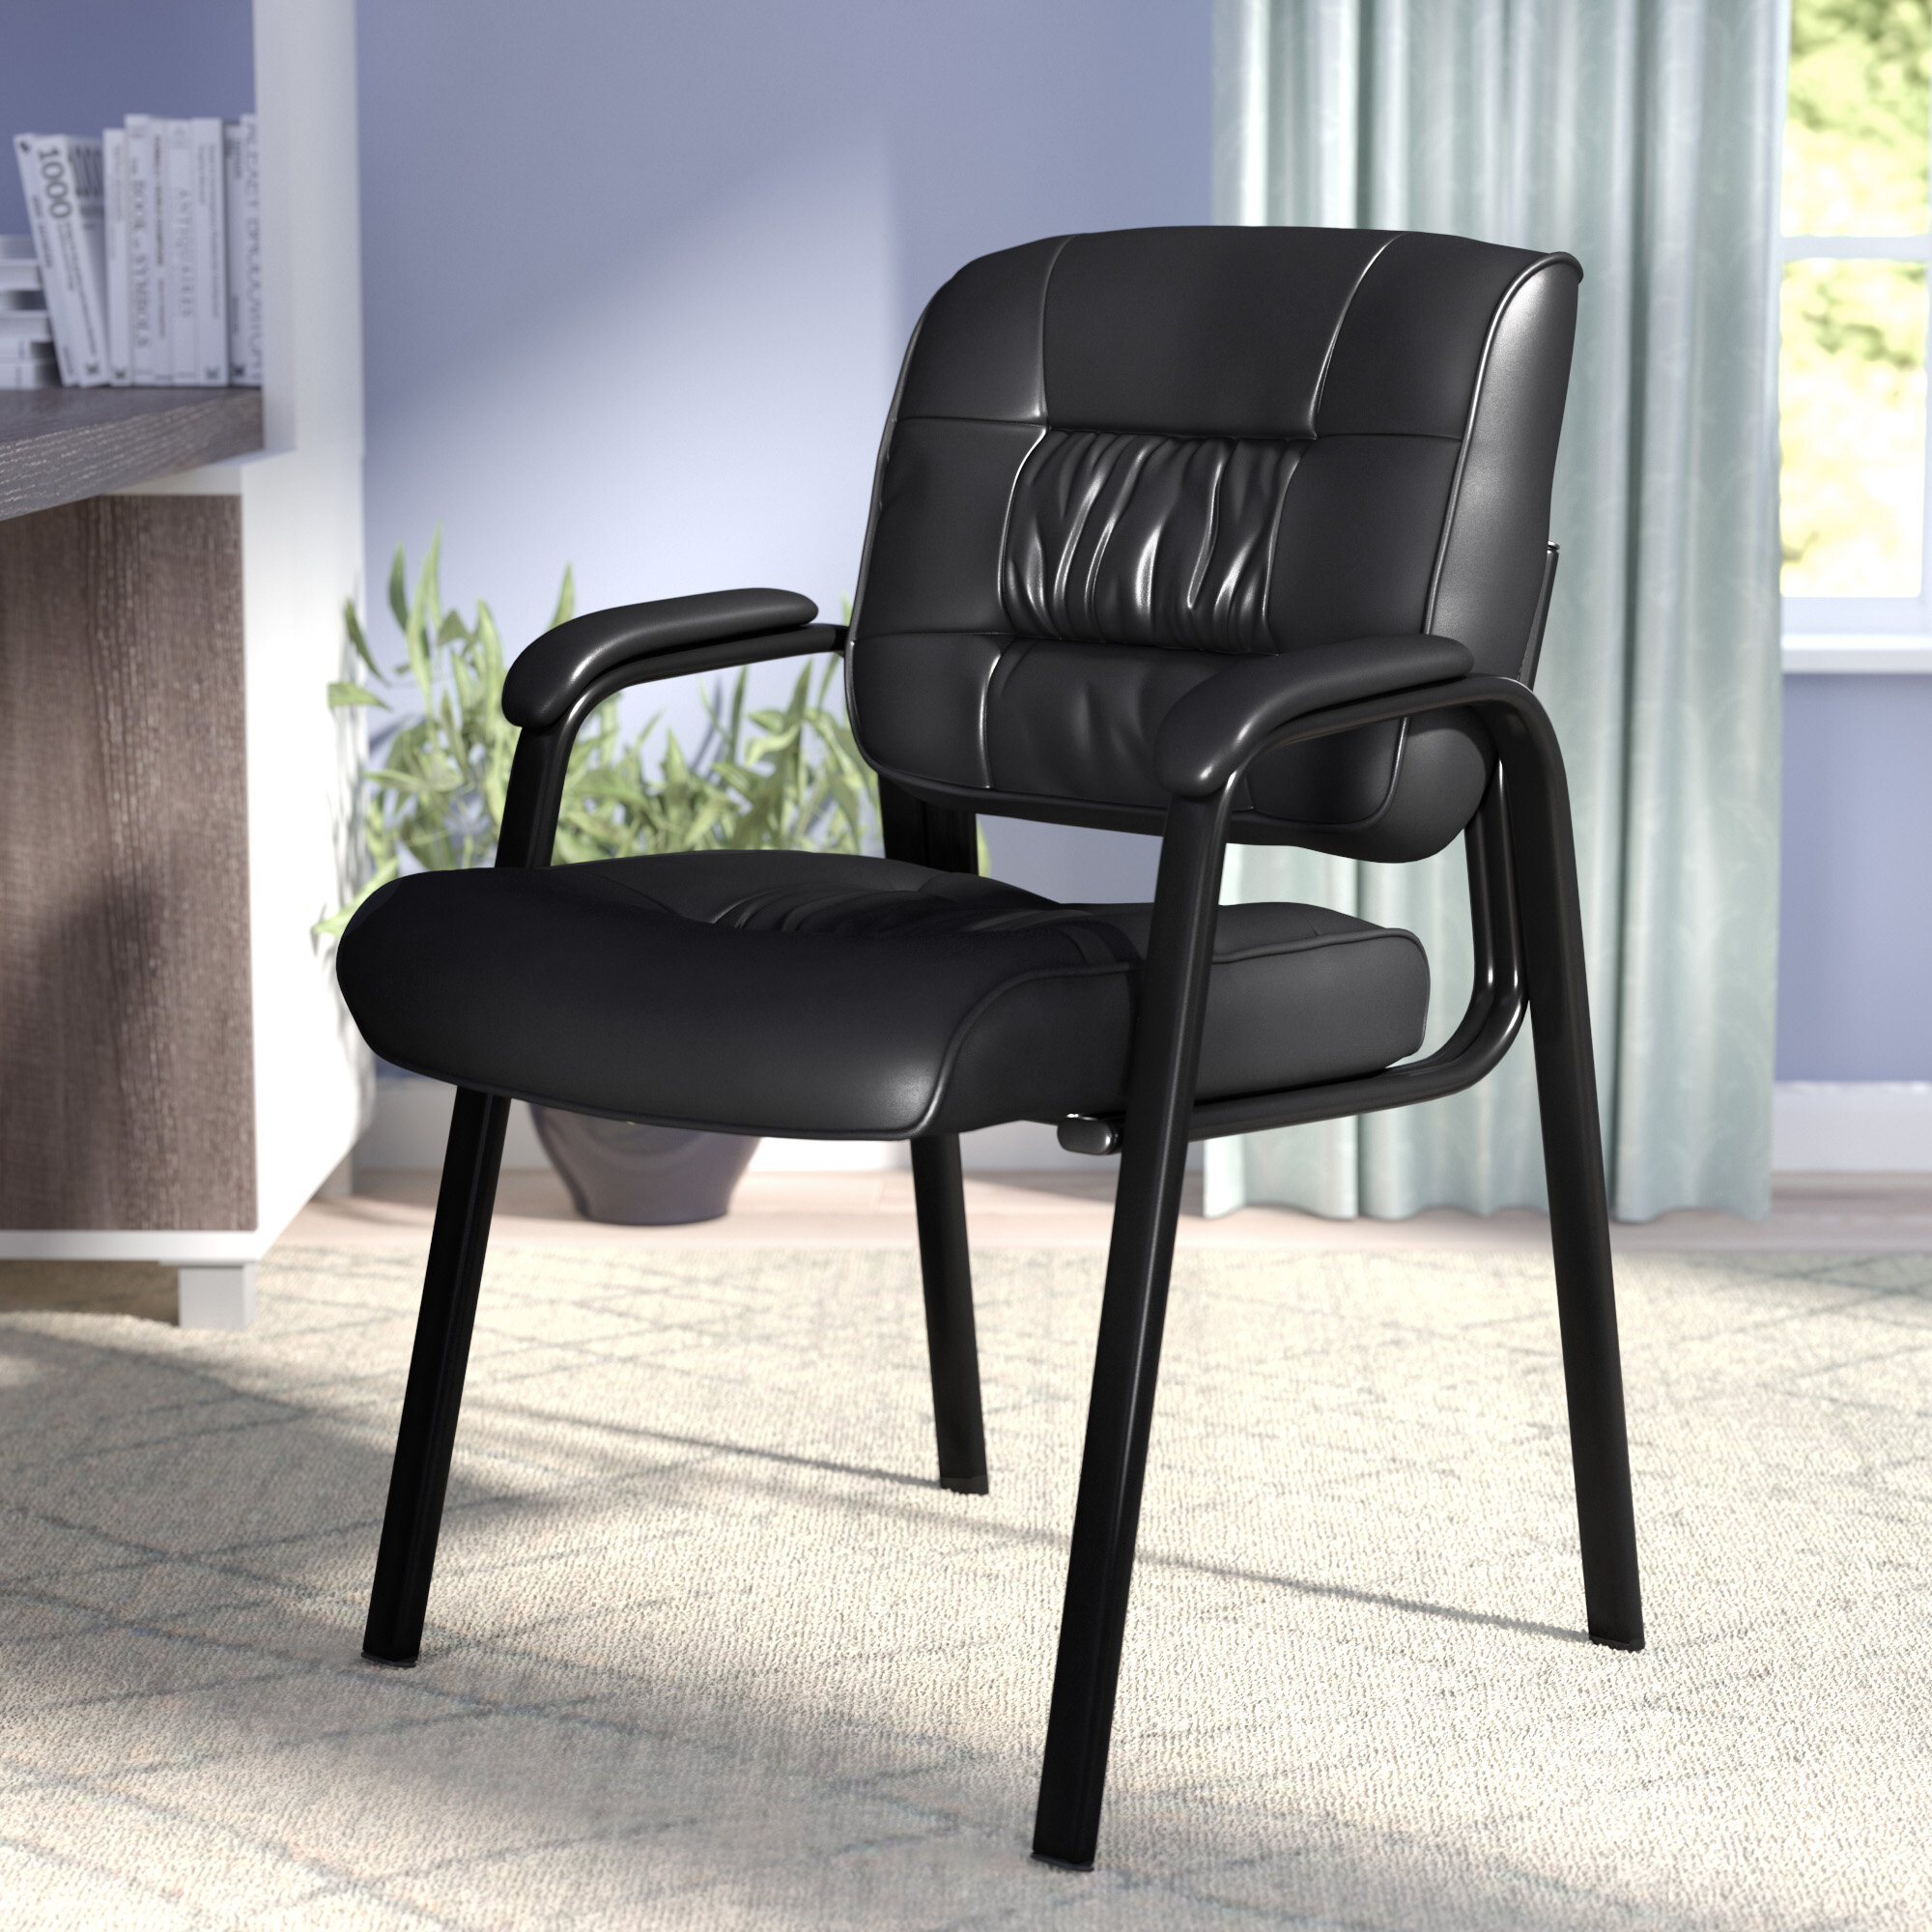 CLATINA Classic Executive Mesh Chair,Big and Tall Office Chair